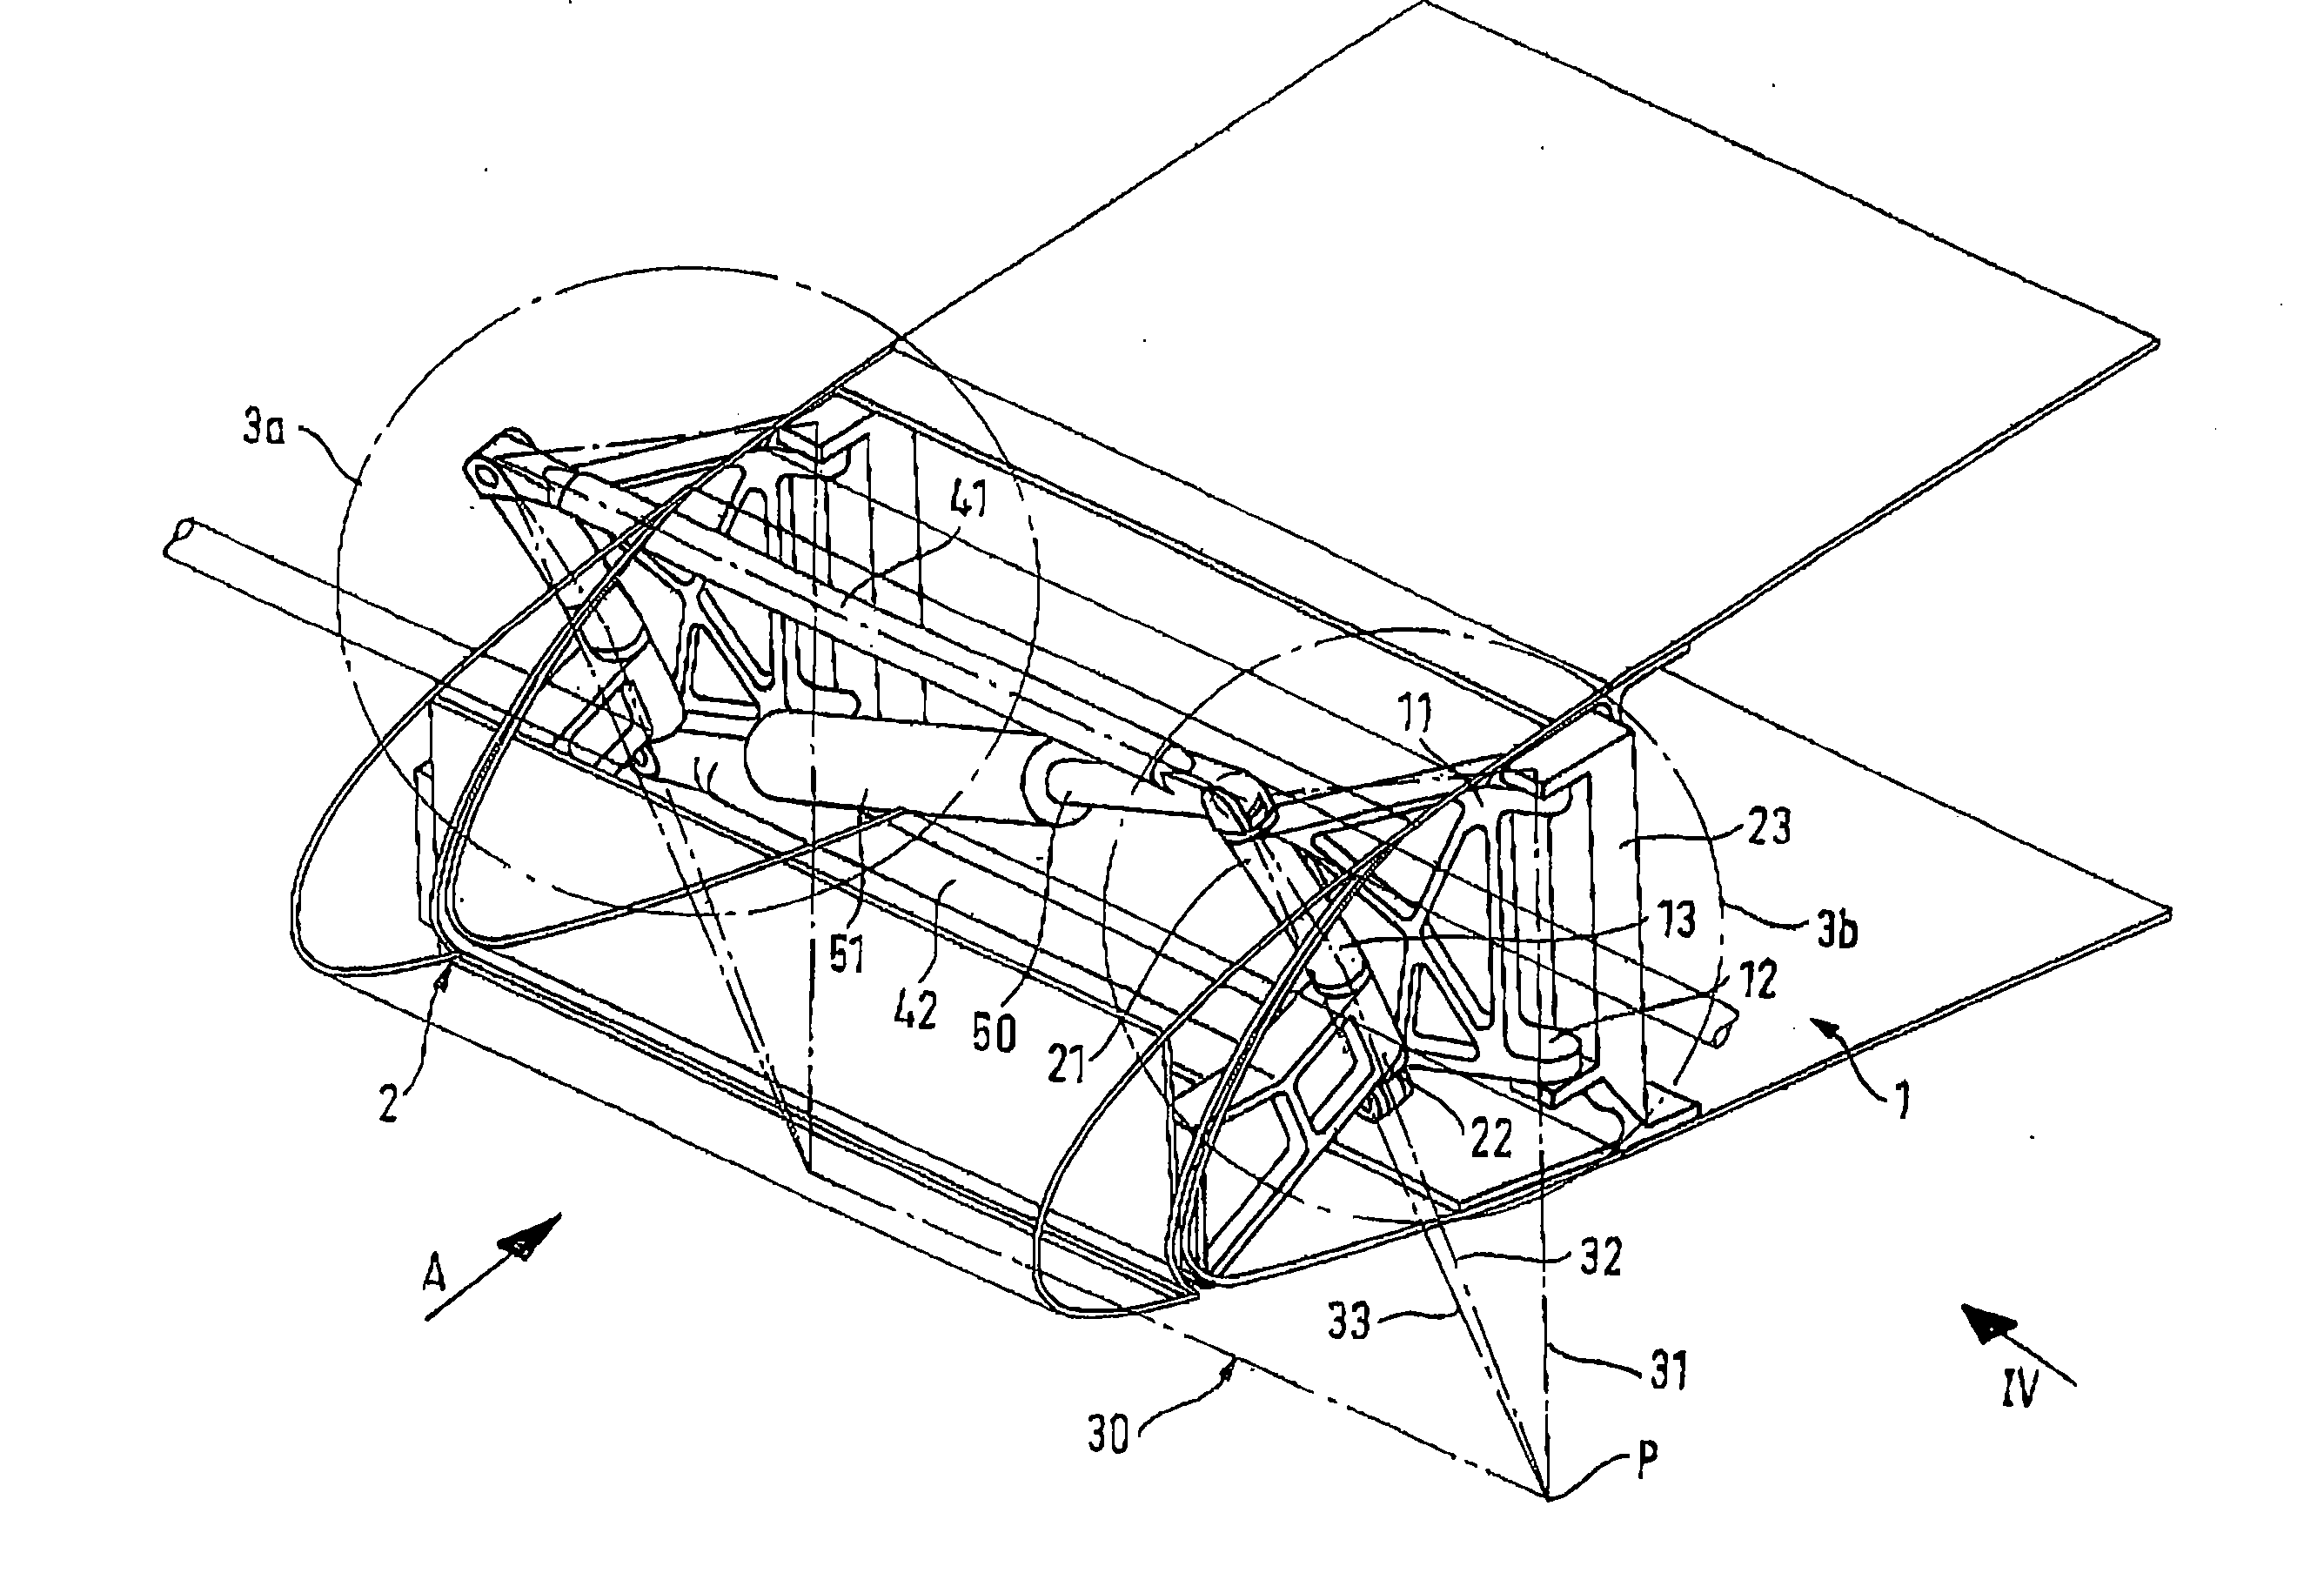 Aircraft wing with extendible nose flap